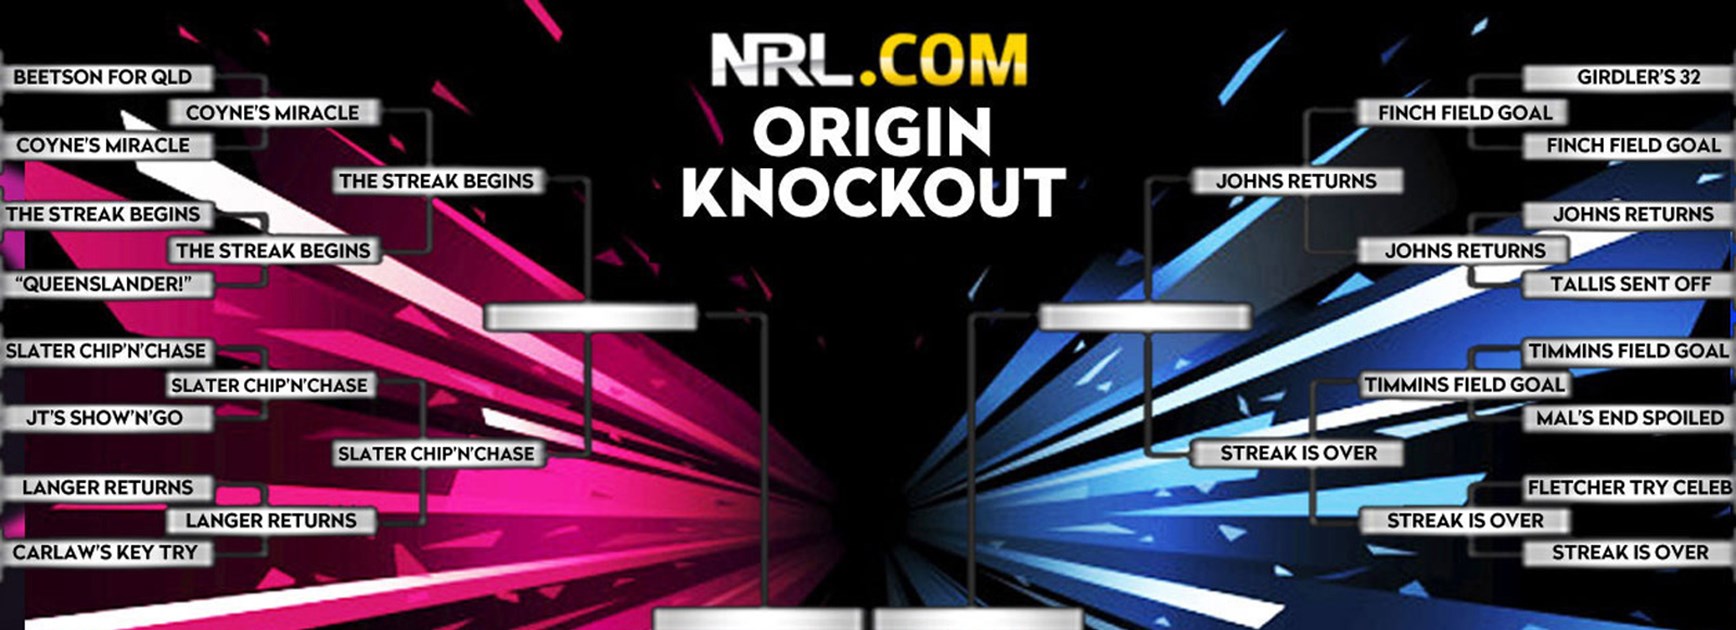 Just eight moments remain in NRL.com's 2016 Origin Knockout countdown.